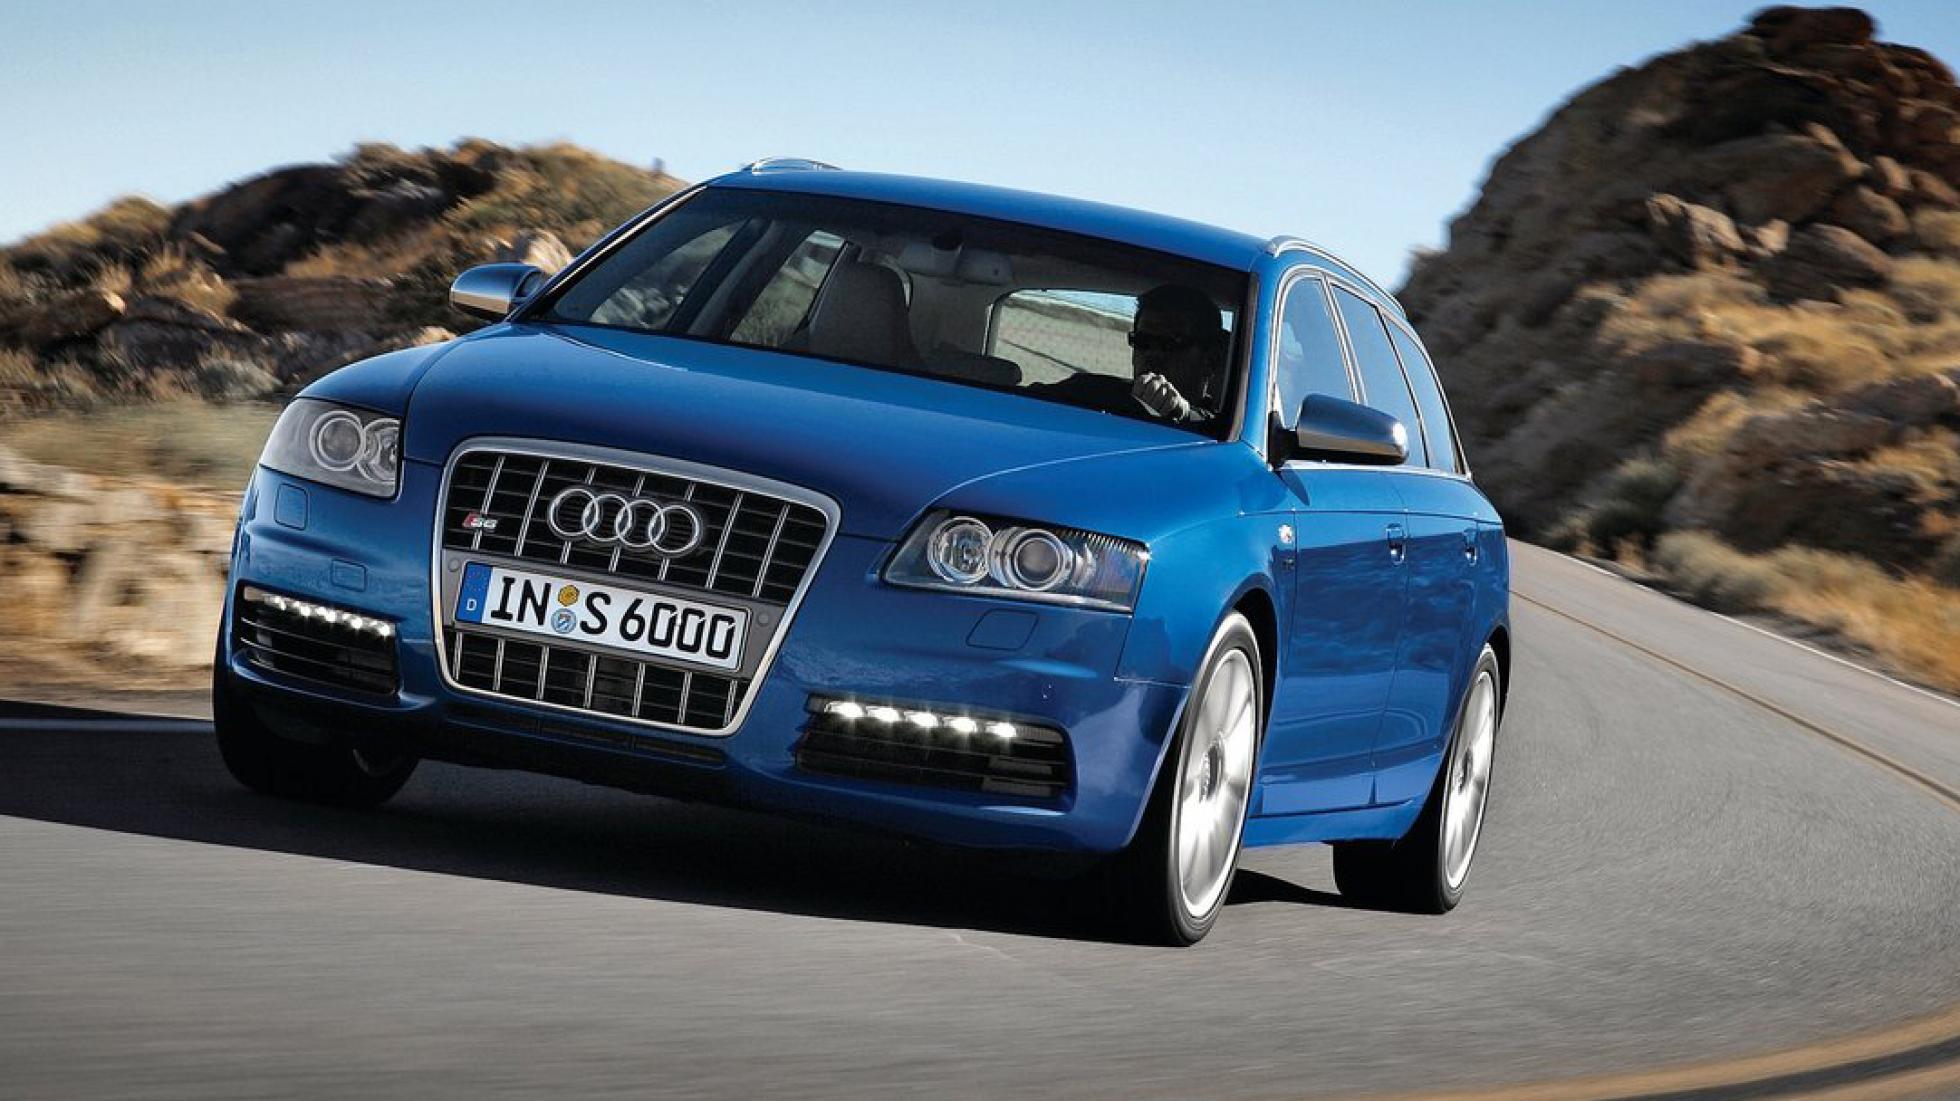 6. How long have Audis been blinding everyone with daytime running lights?